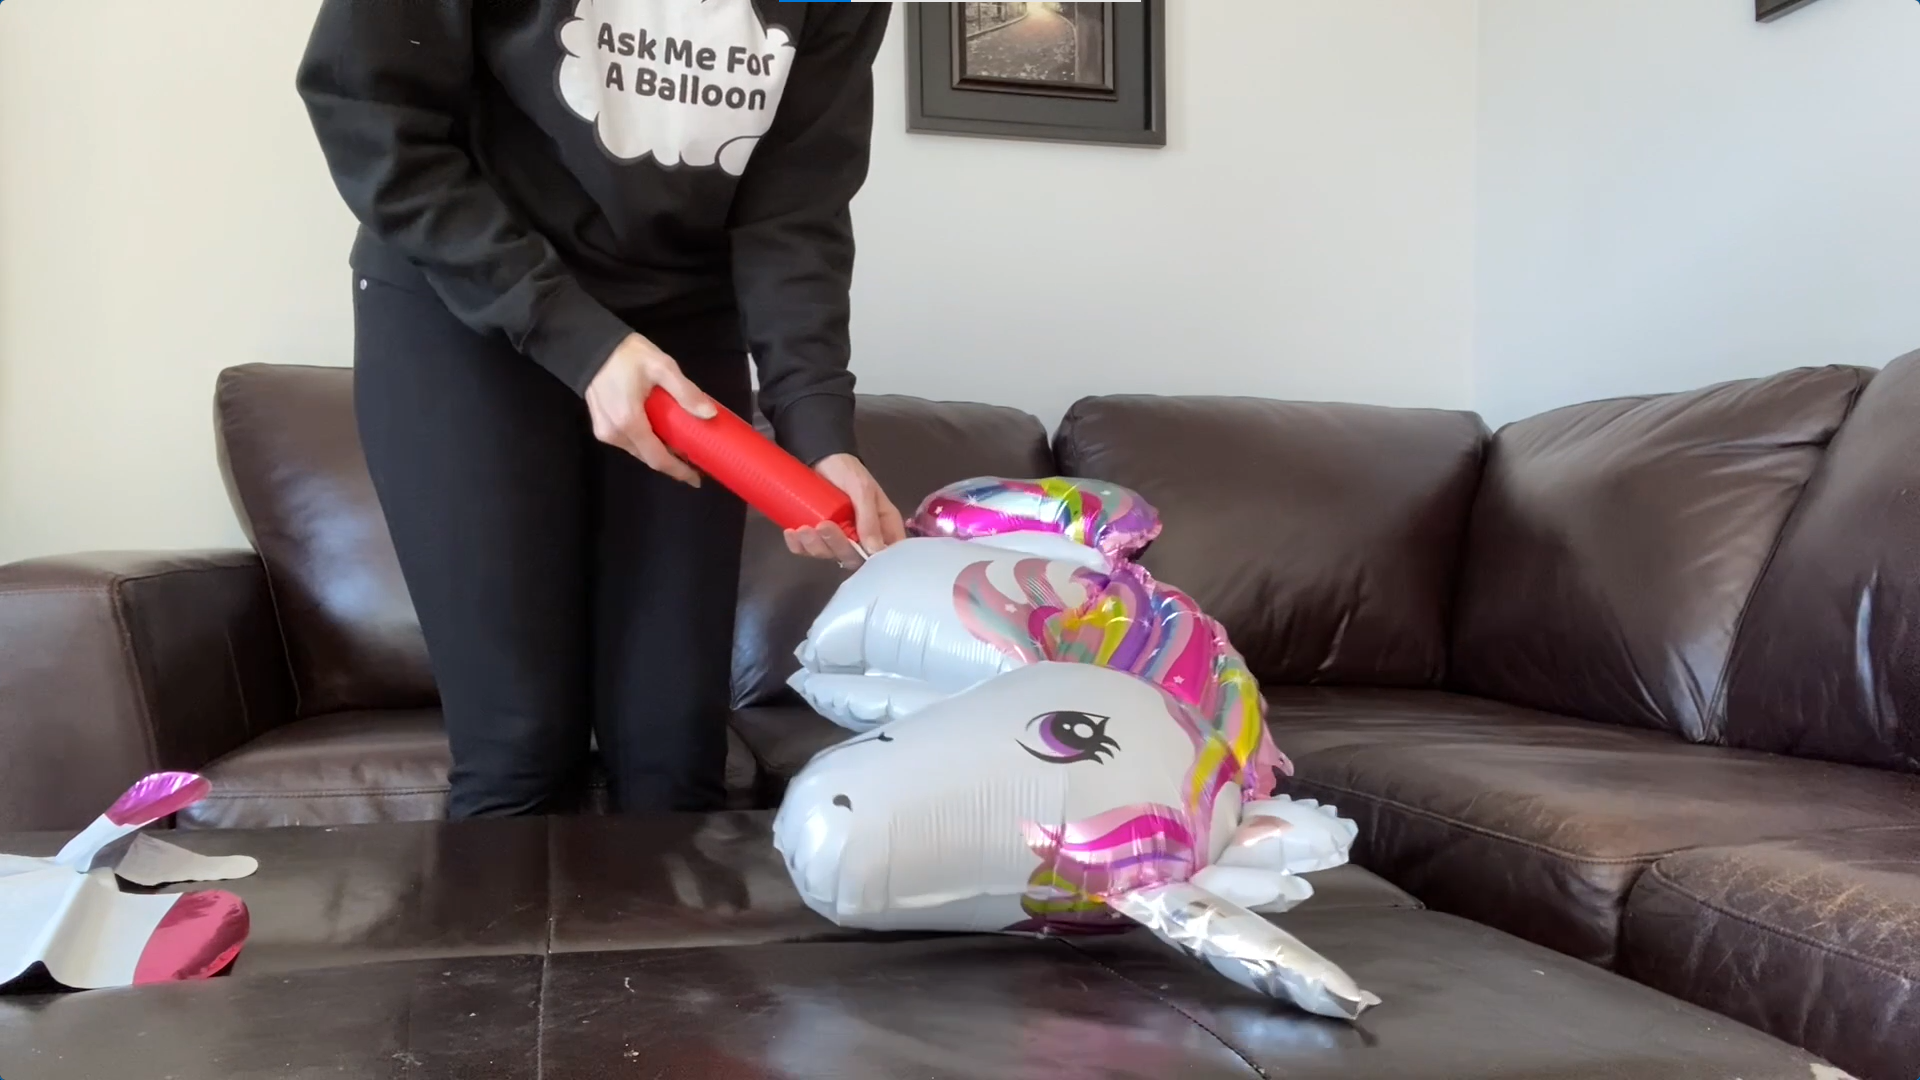 Unicorn balloon being inflated